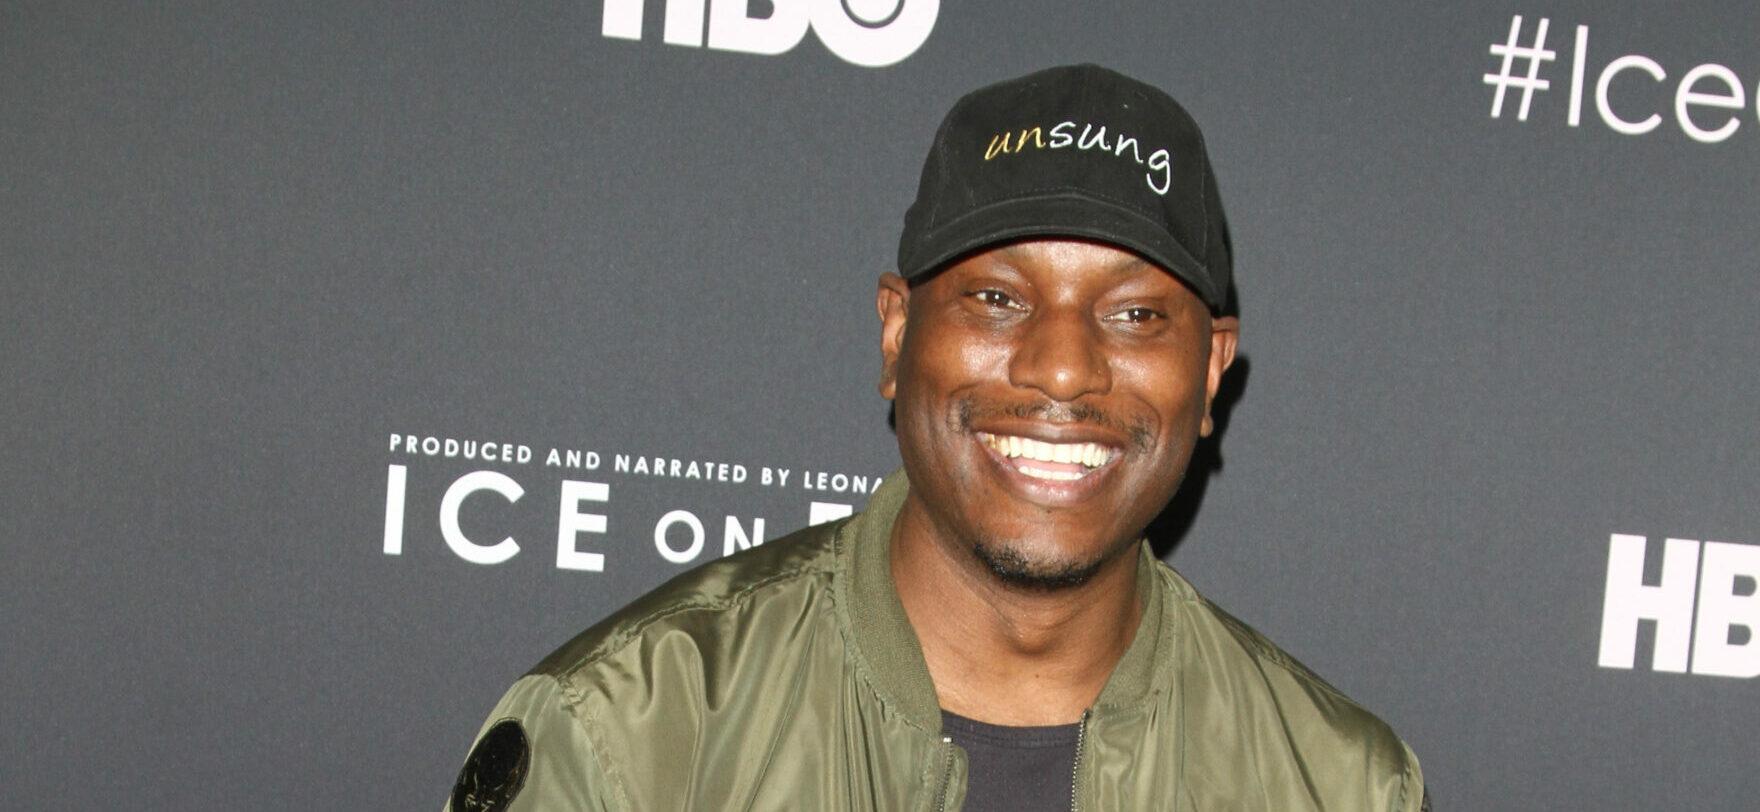 Tyrese at the HBO Documentary "Ice on Fire" in Los Angeles